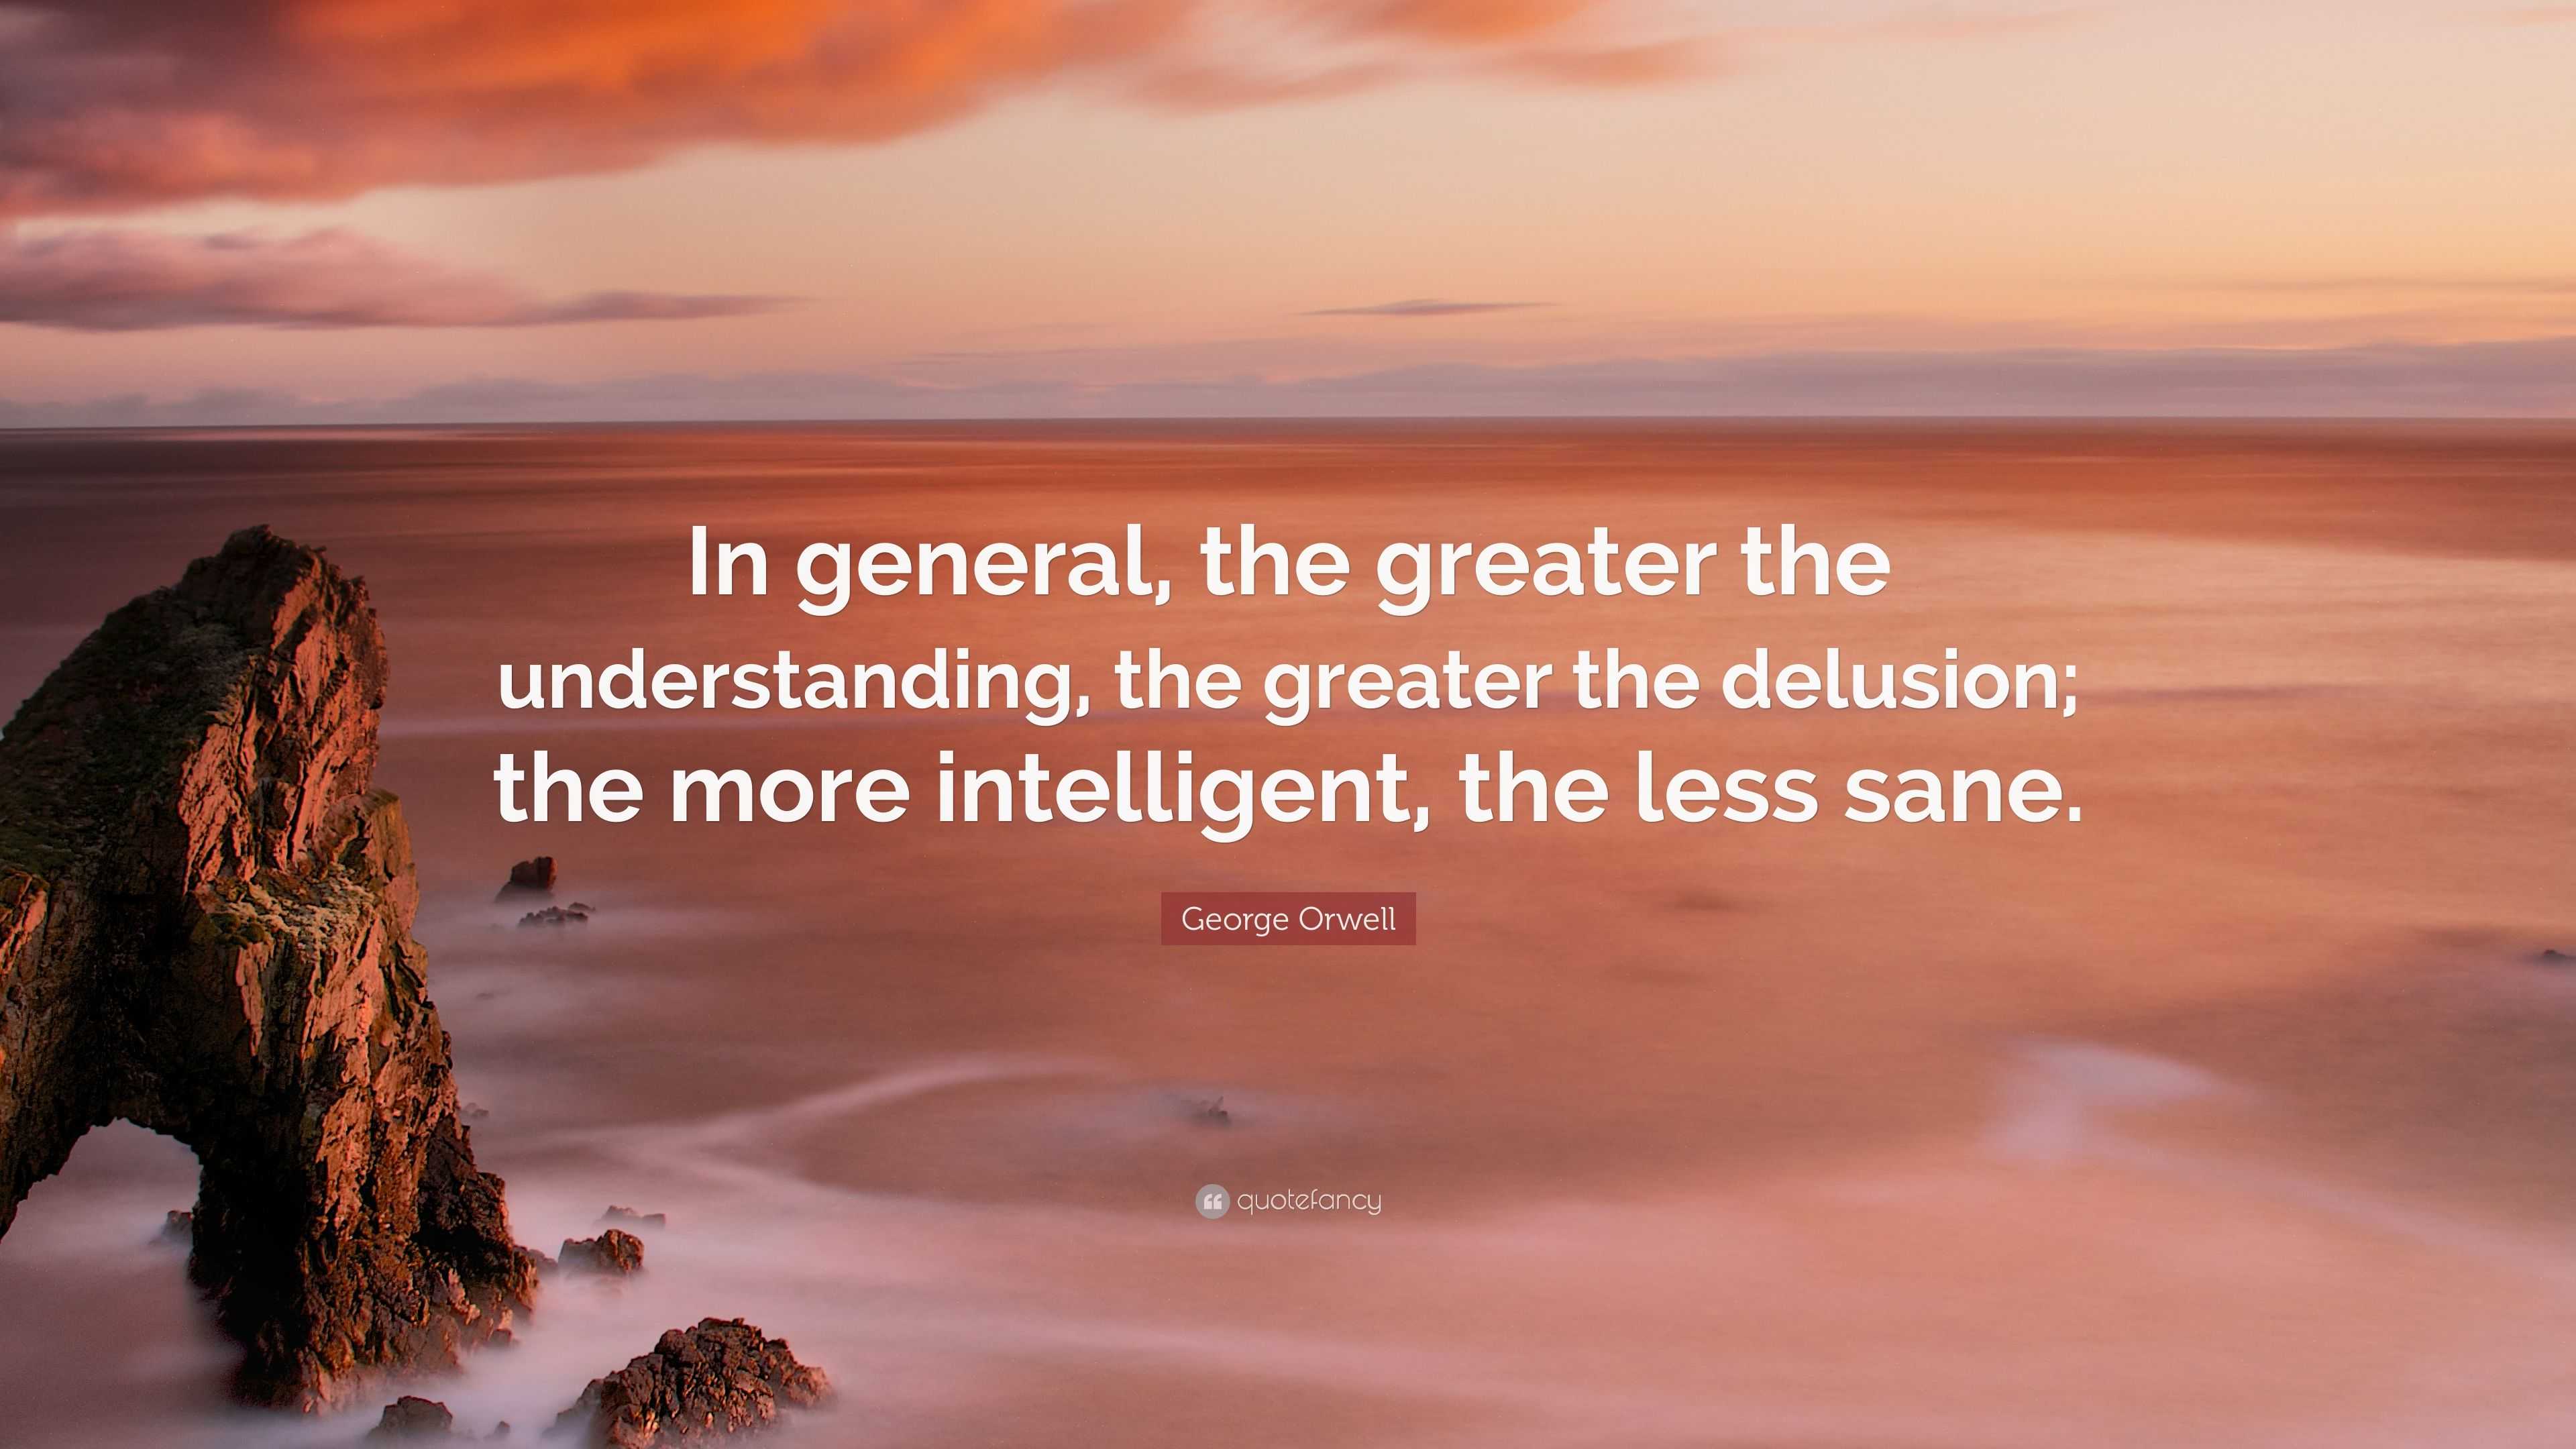 George Orwell Quote: “In general, the greater the understanding, the ...